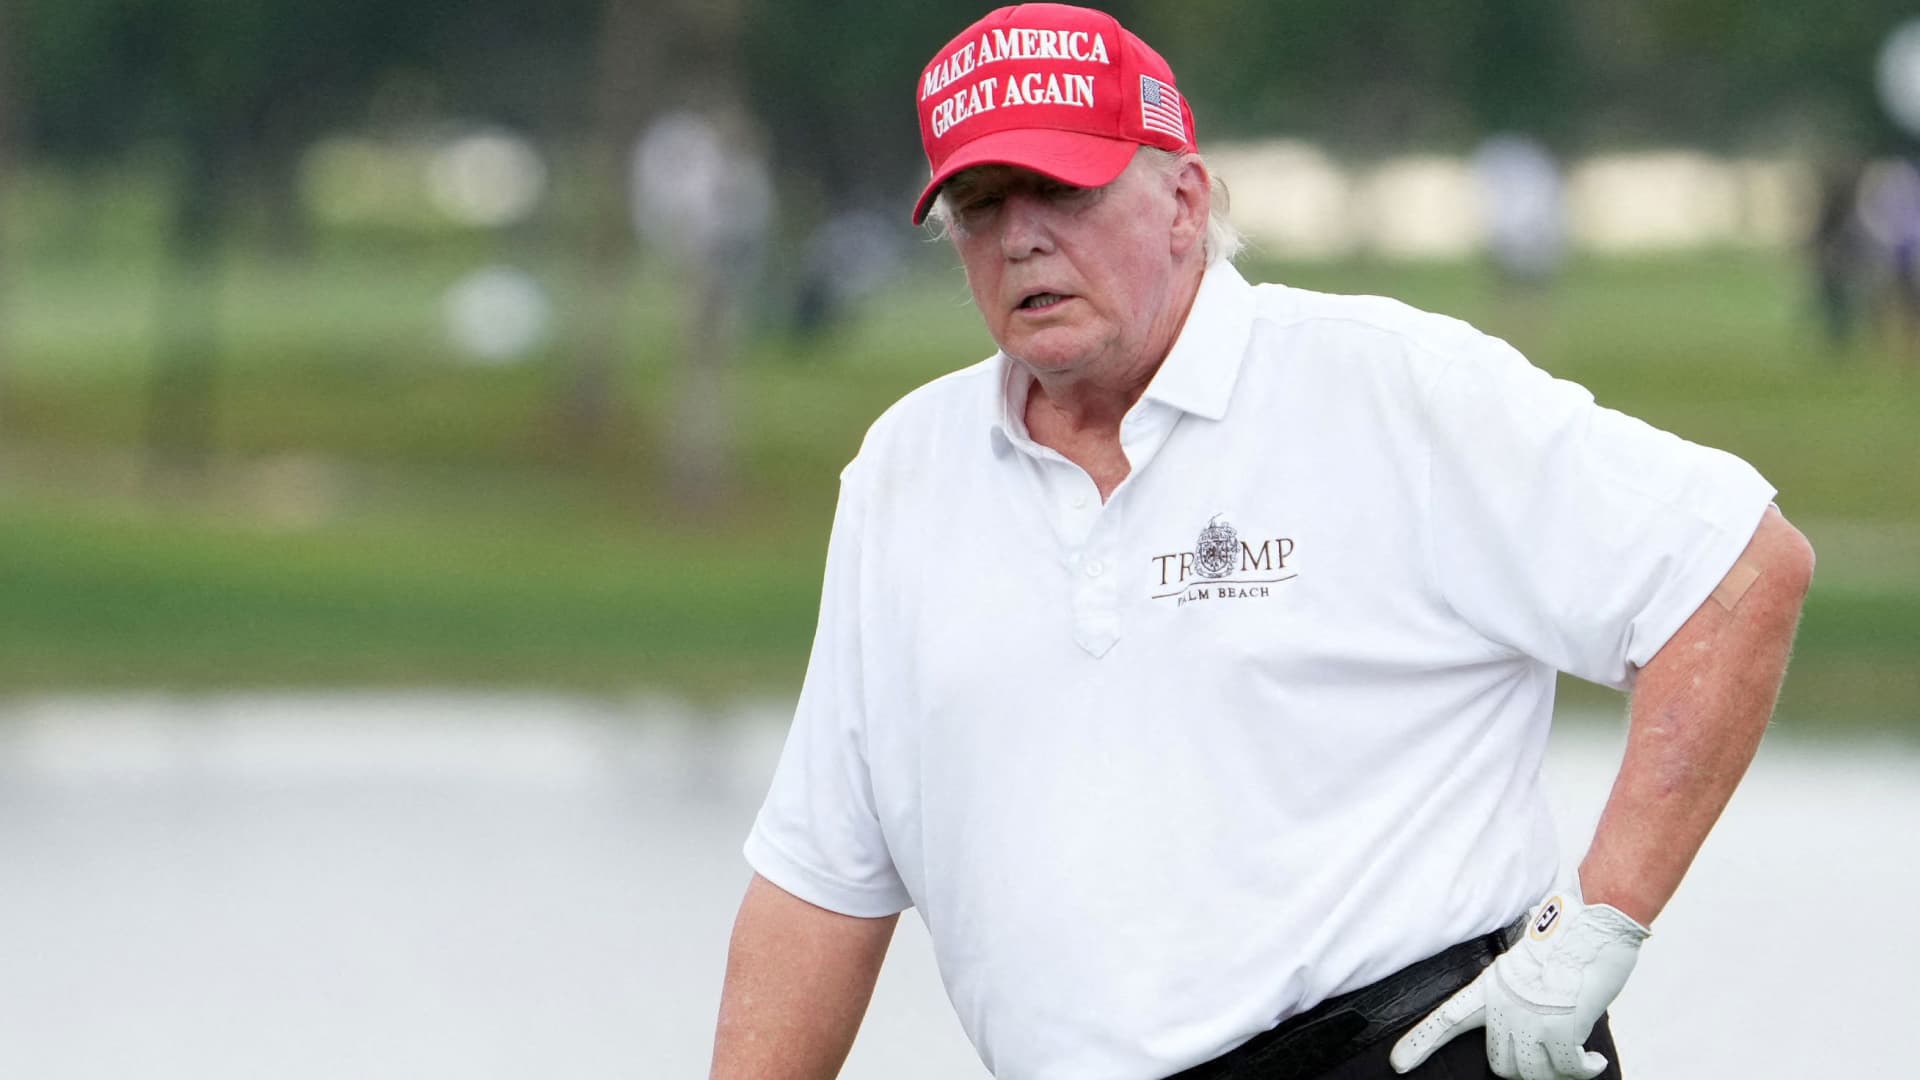 Former President Donald Trump stands on the 18th green during the Pro-Am tournament before the LIV Golf series at Trump National Doral, Oct. 27, 2022.